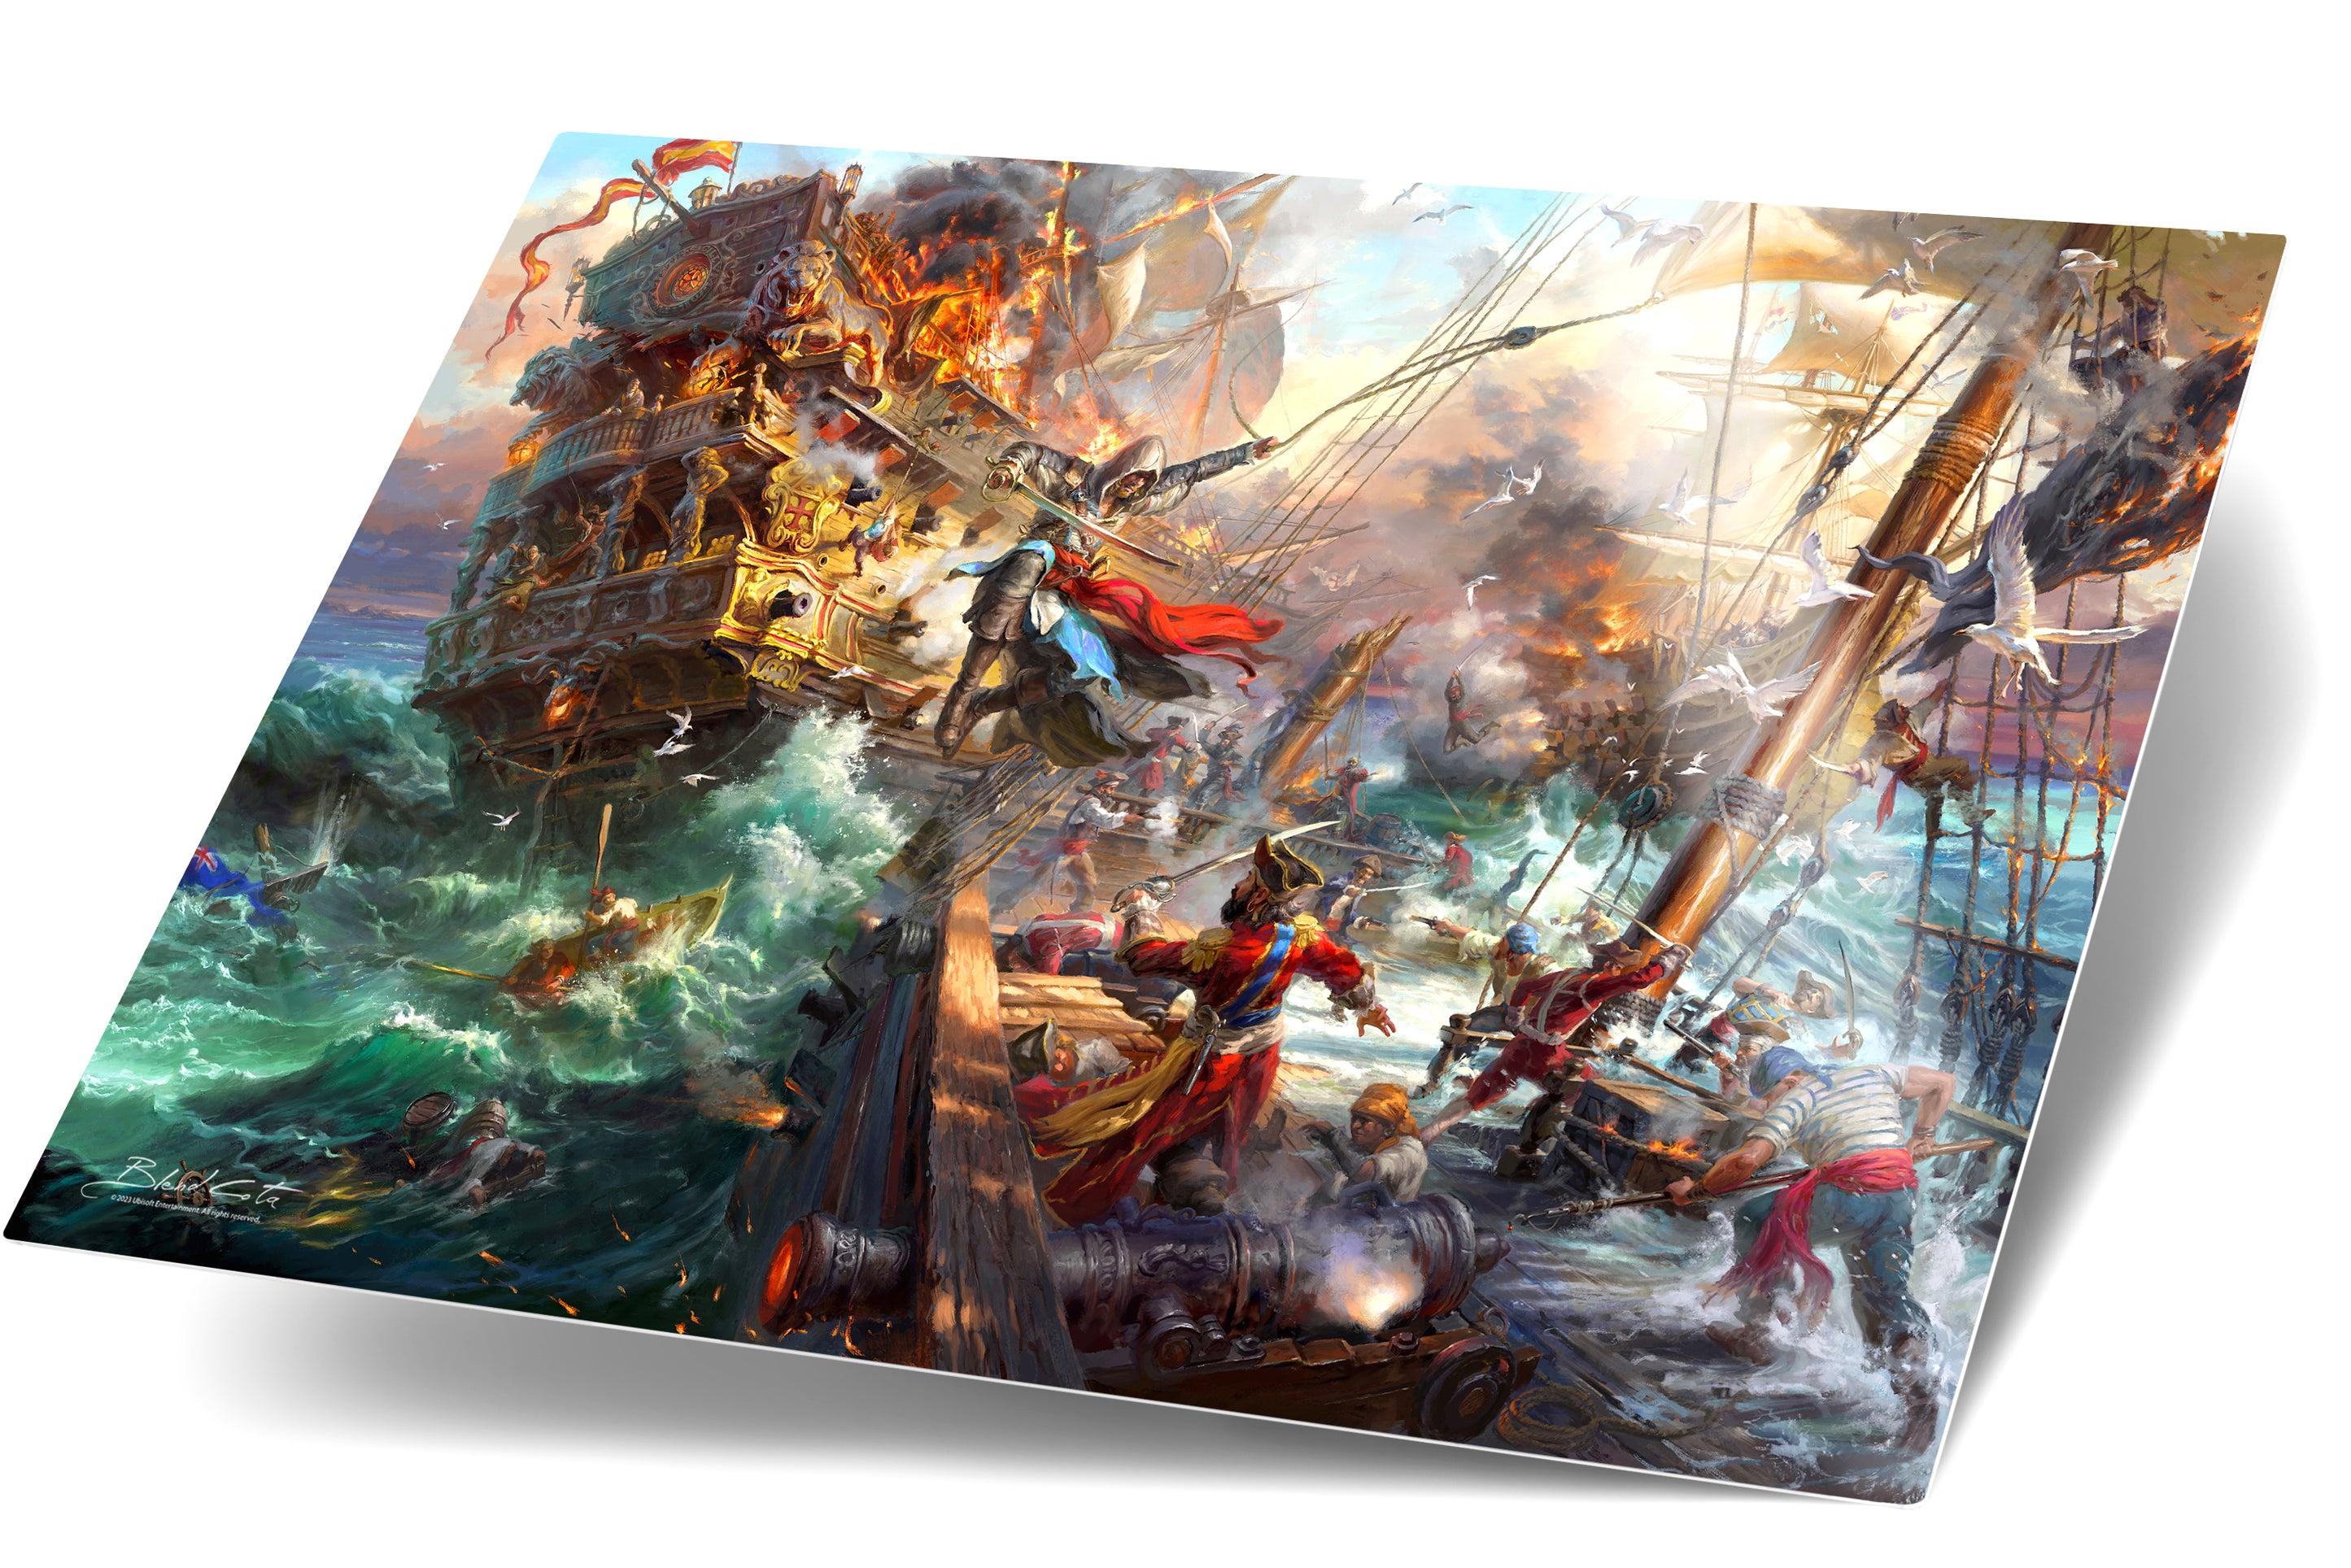 
                  
                    Art print on metal of Assassin's Creed Black Flag and Edward Kenway meticulously designed and painted with intricate details in a realistic style.
                  
                